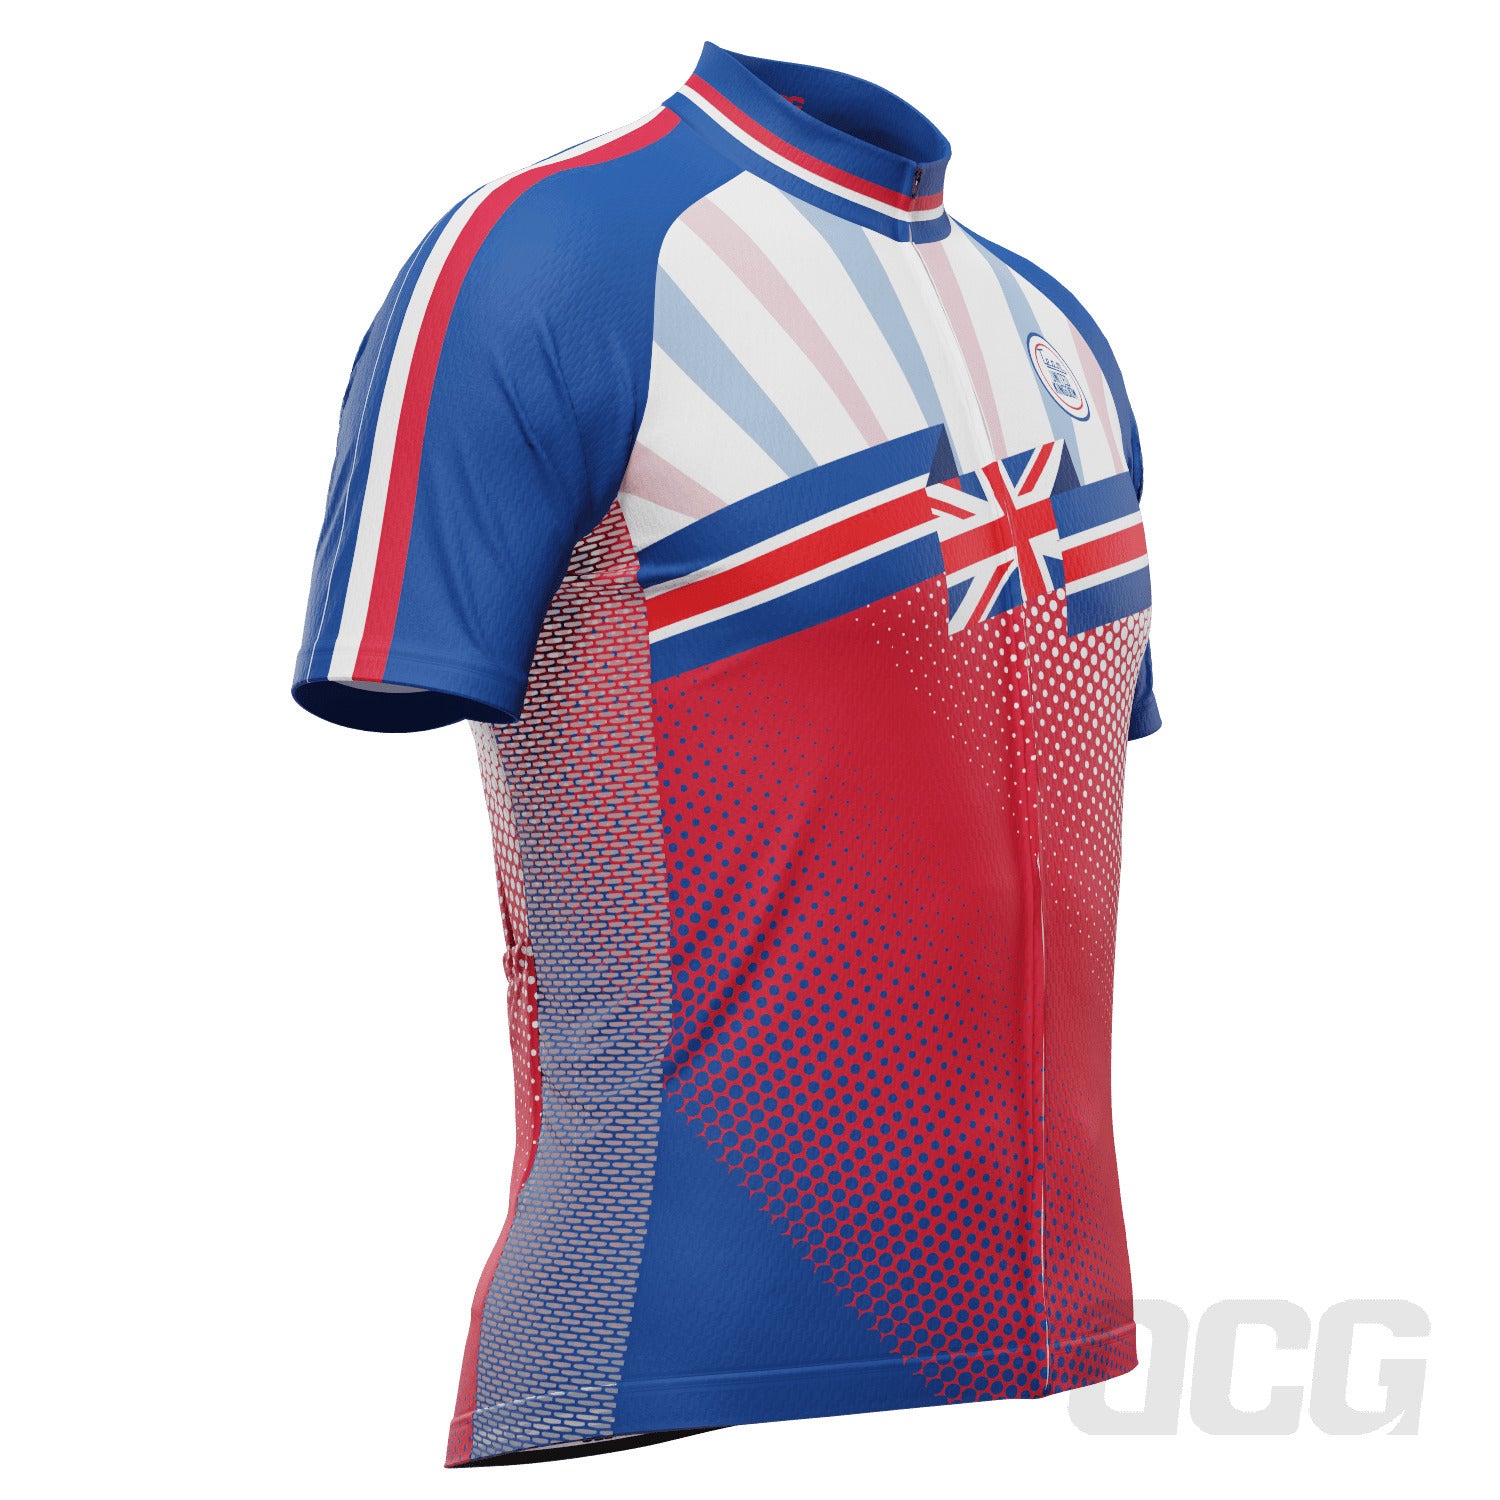 Men's World Countries Team UK Icon Short Sleeve Cycling Jersey